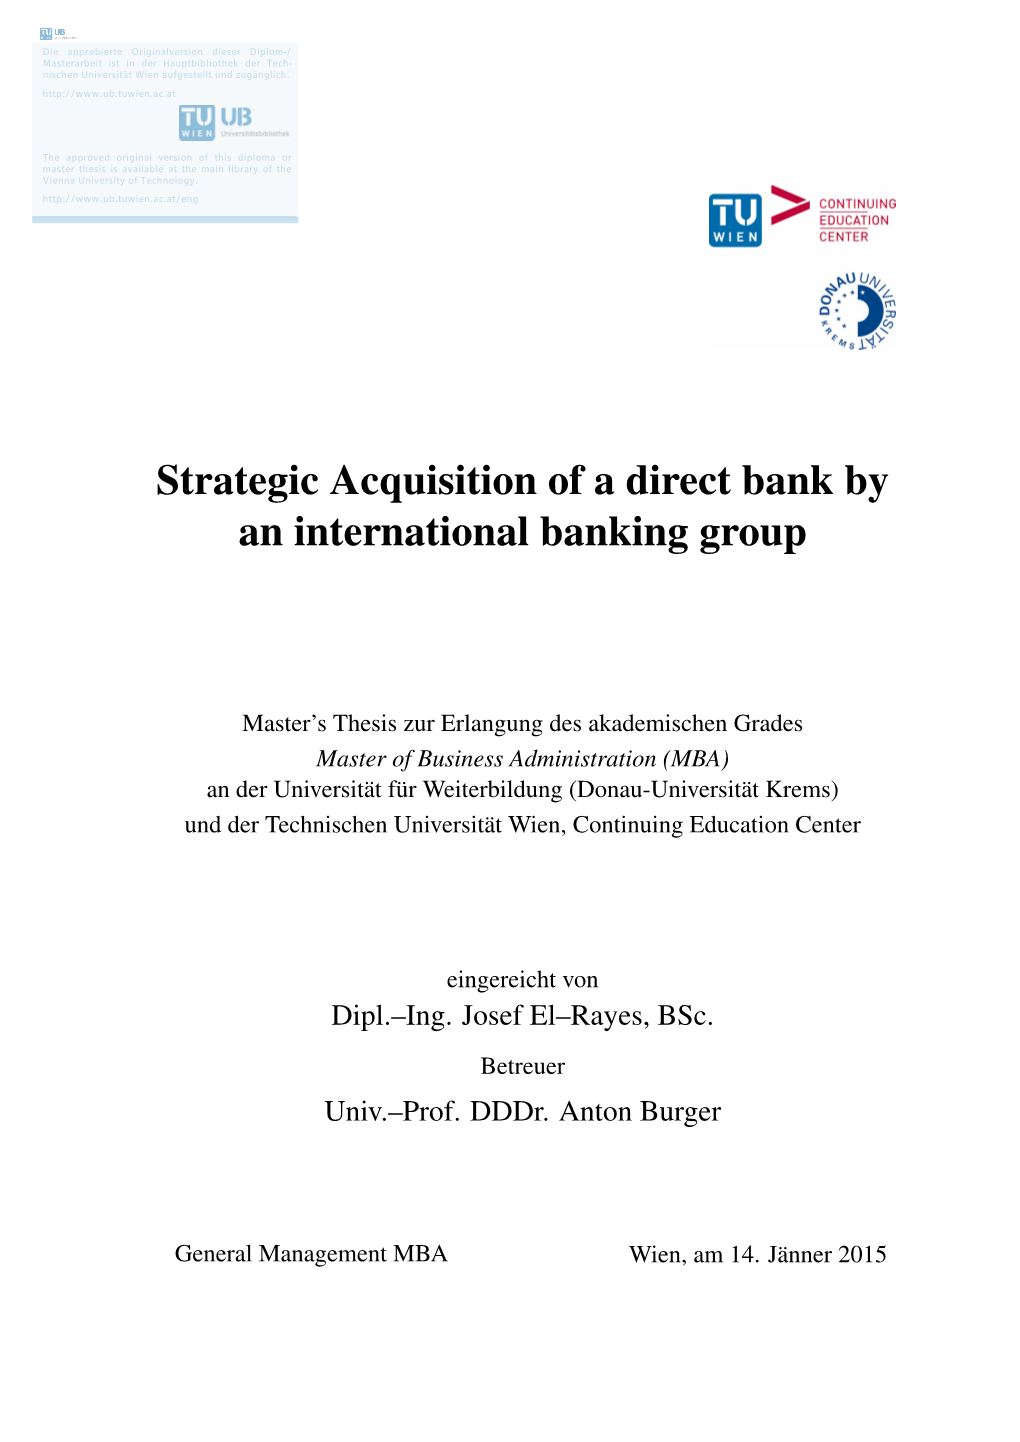 Strategic Acquisition of a Direct Bank by an International Banking Group